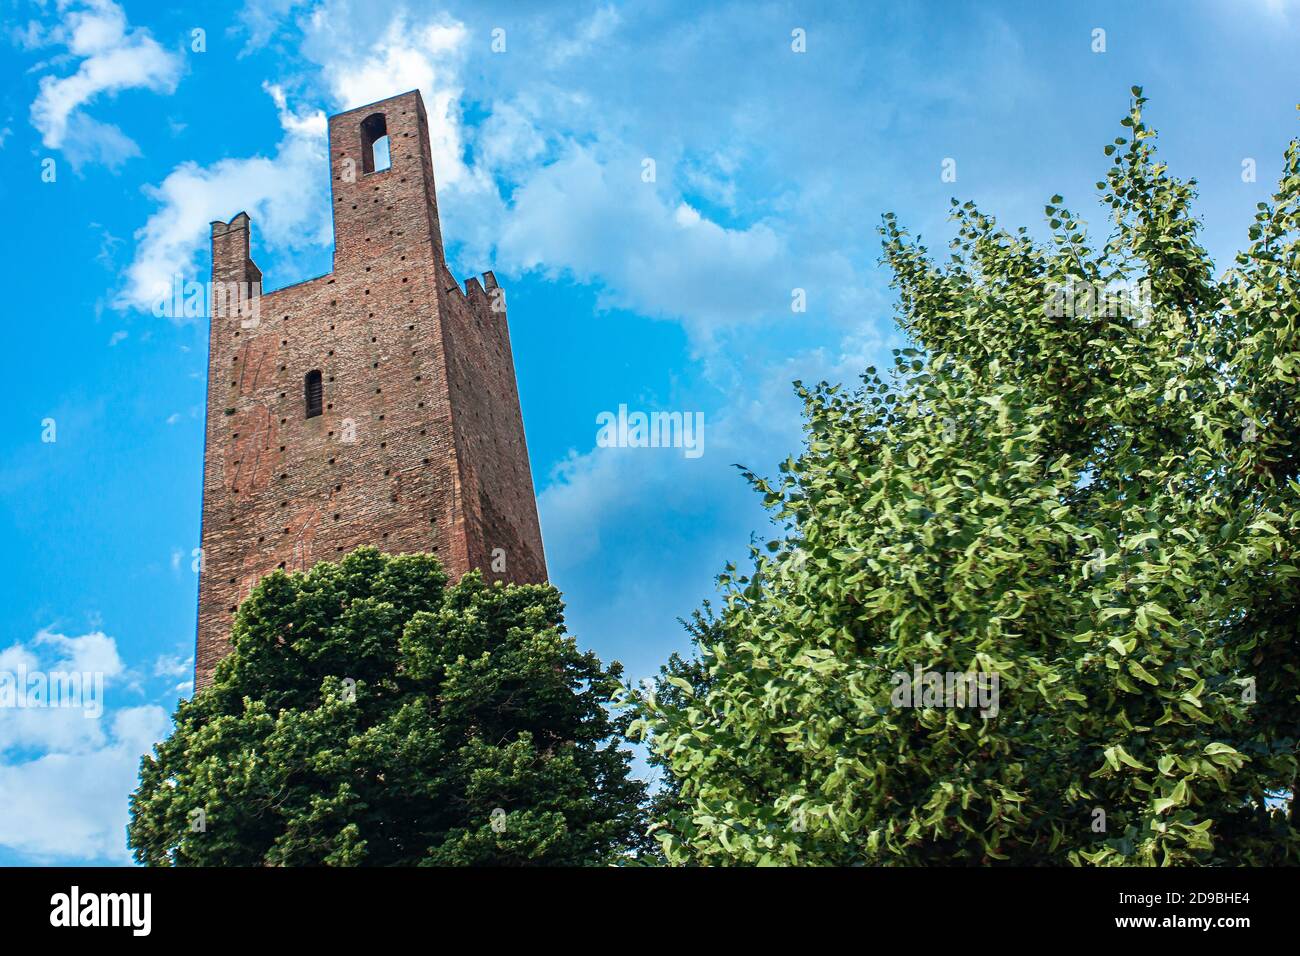 Rovigo's historical tower in Italy with trees and blue sky Stock Photo